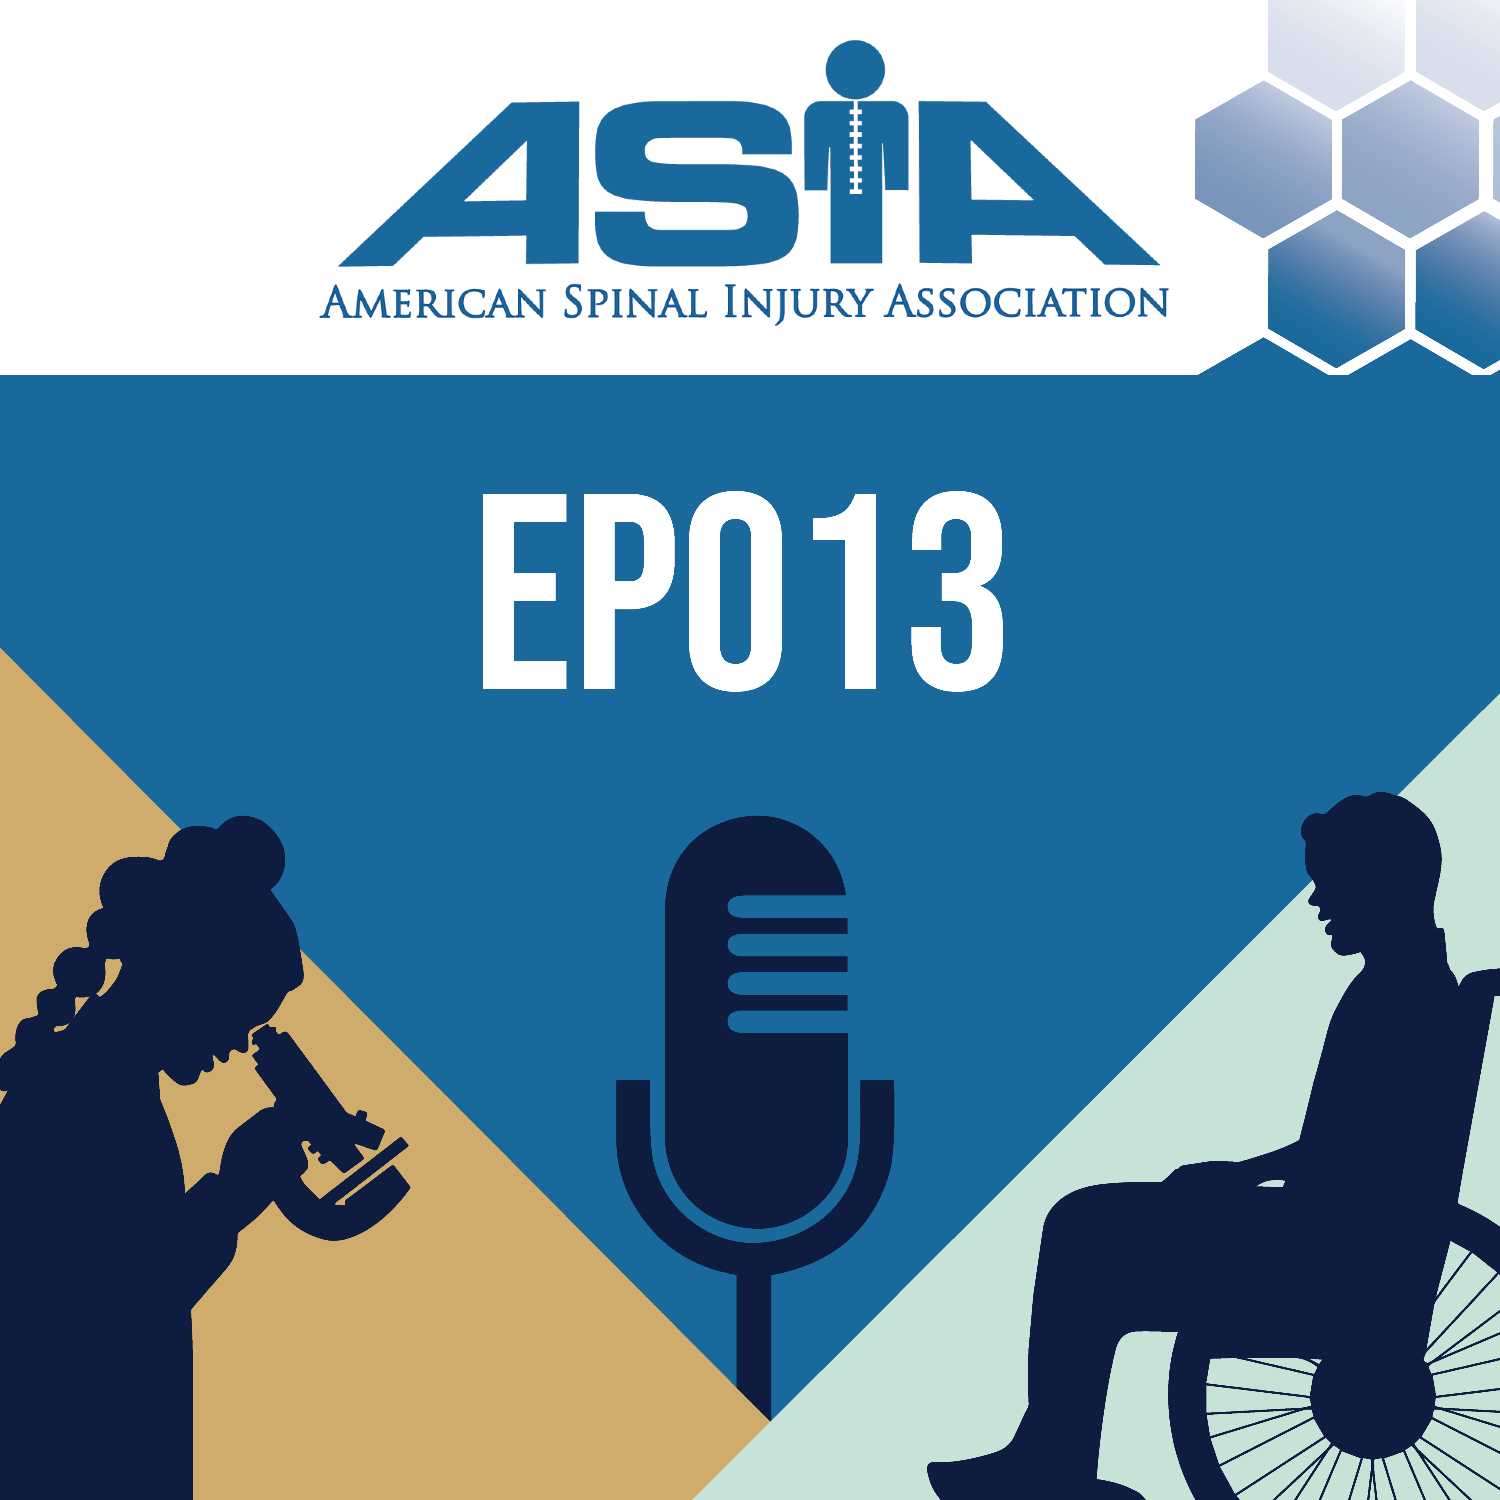 Scholarly EP013 – Epidural Spinal Cord Stimulation for Cardiovascular Control with Dr. Aaron Phillips